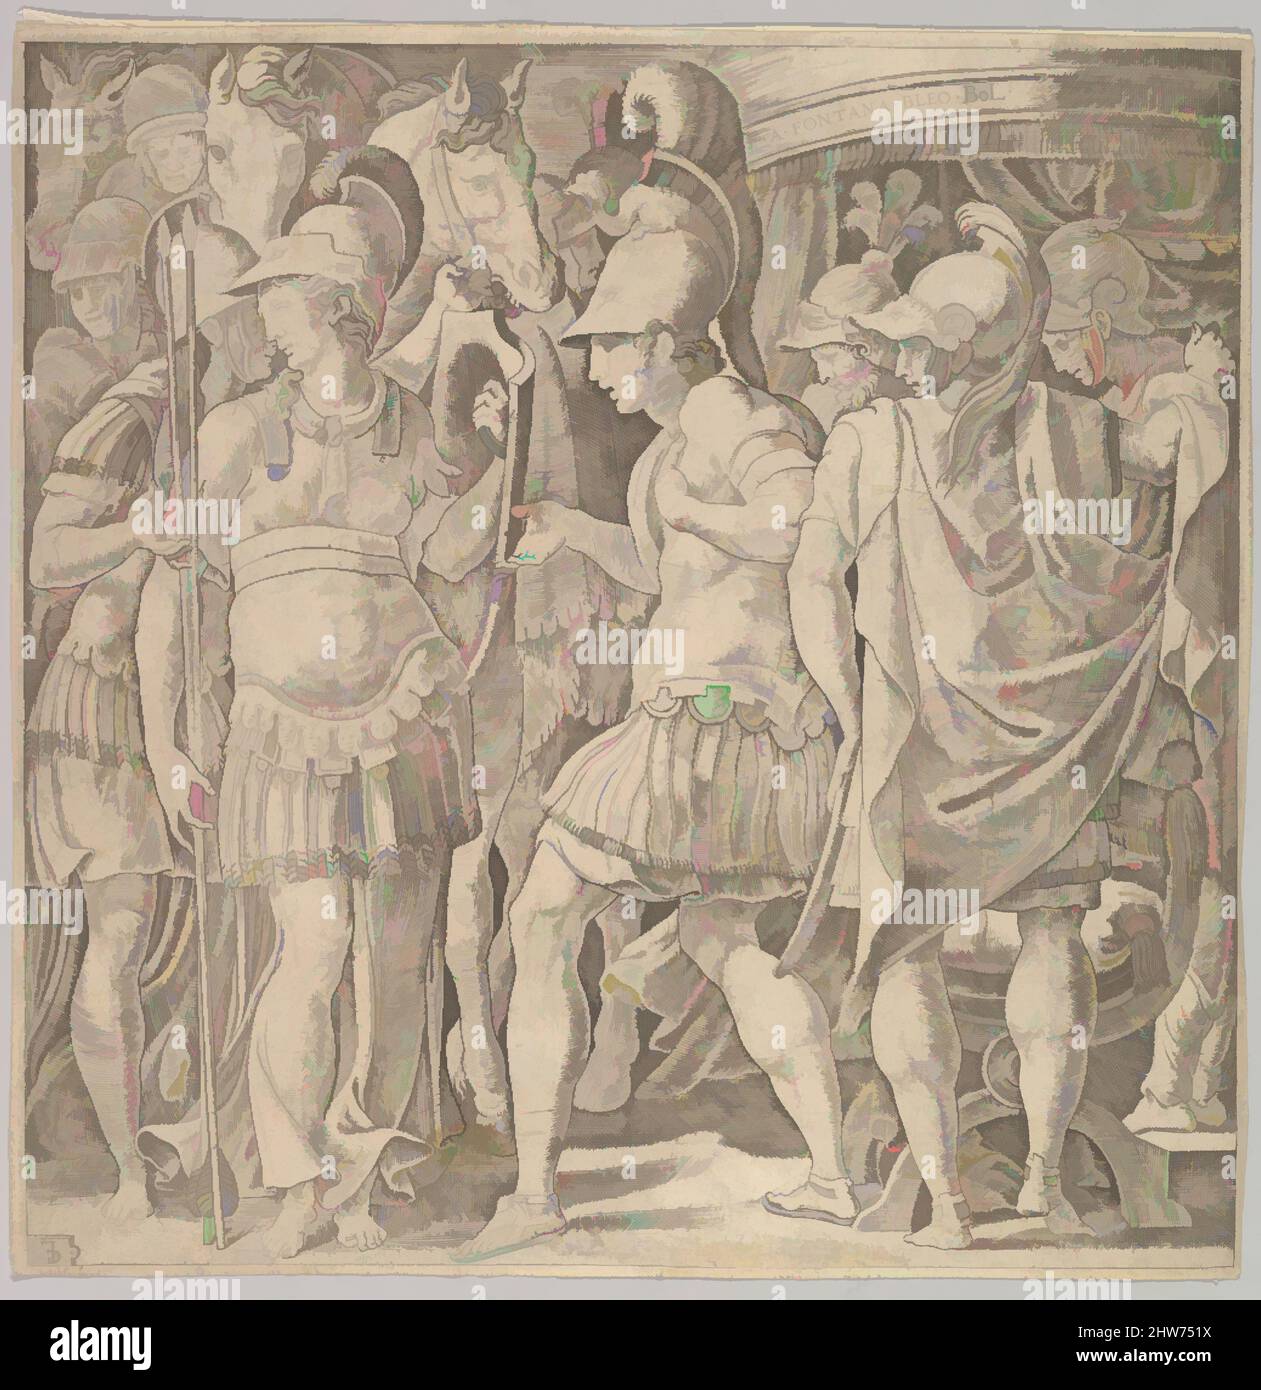 Art inspired by Alexander welcoming Thalestris and the Amazons, mid-16th century, Engraving, sheet: 9 7/16 x 9 7/16 in. (24 x 24 cm), Prints, Master FG (Italian, active mid-16th century), After Francesco Primaticcio (Italian, Bologna 1504/5–1570 Paris, Classic works modernized by Artotop with a splash of modernity. Shapes, color and value, eye-catching visual impact on art. Emotions through freedom of artworks in a contemporary way. A timeless message pursuing a wildly creative new direction. Artists turning to the digital medium and creating the Artotop NFT Stock Photo